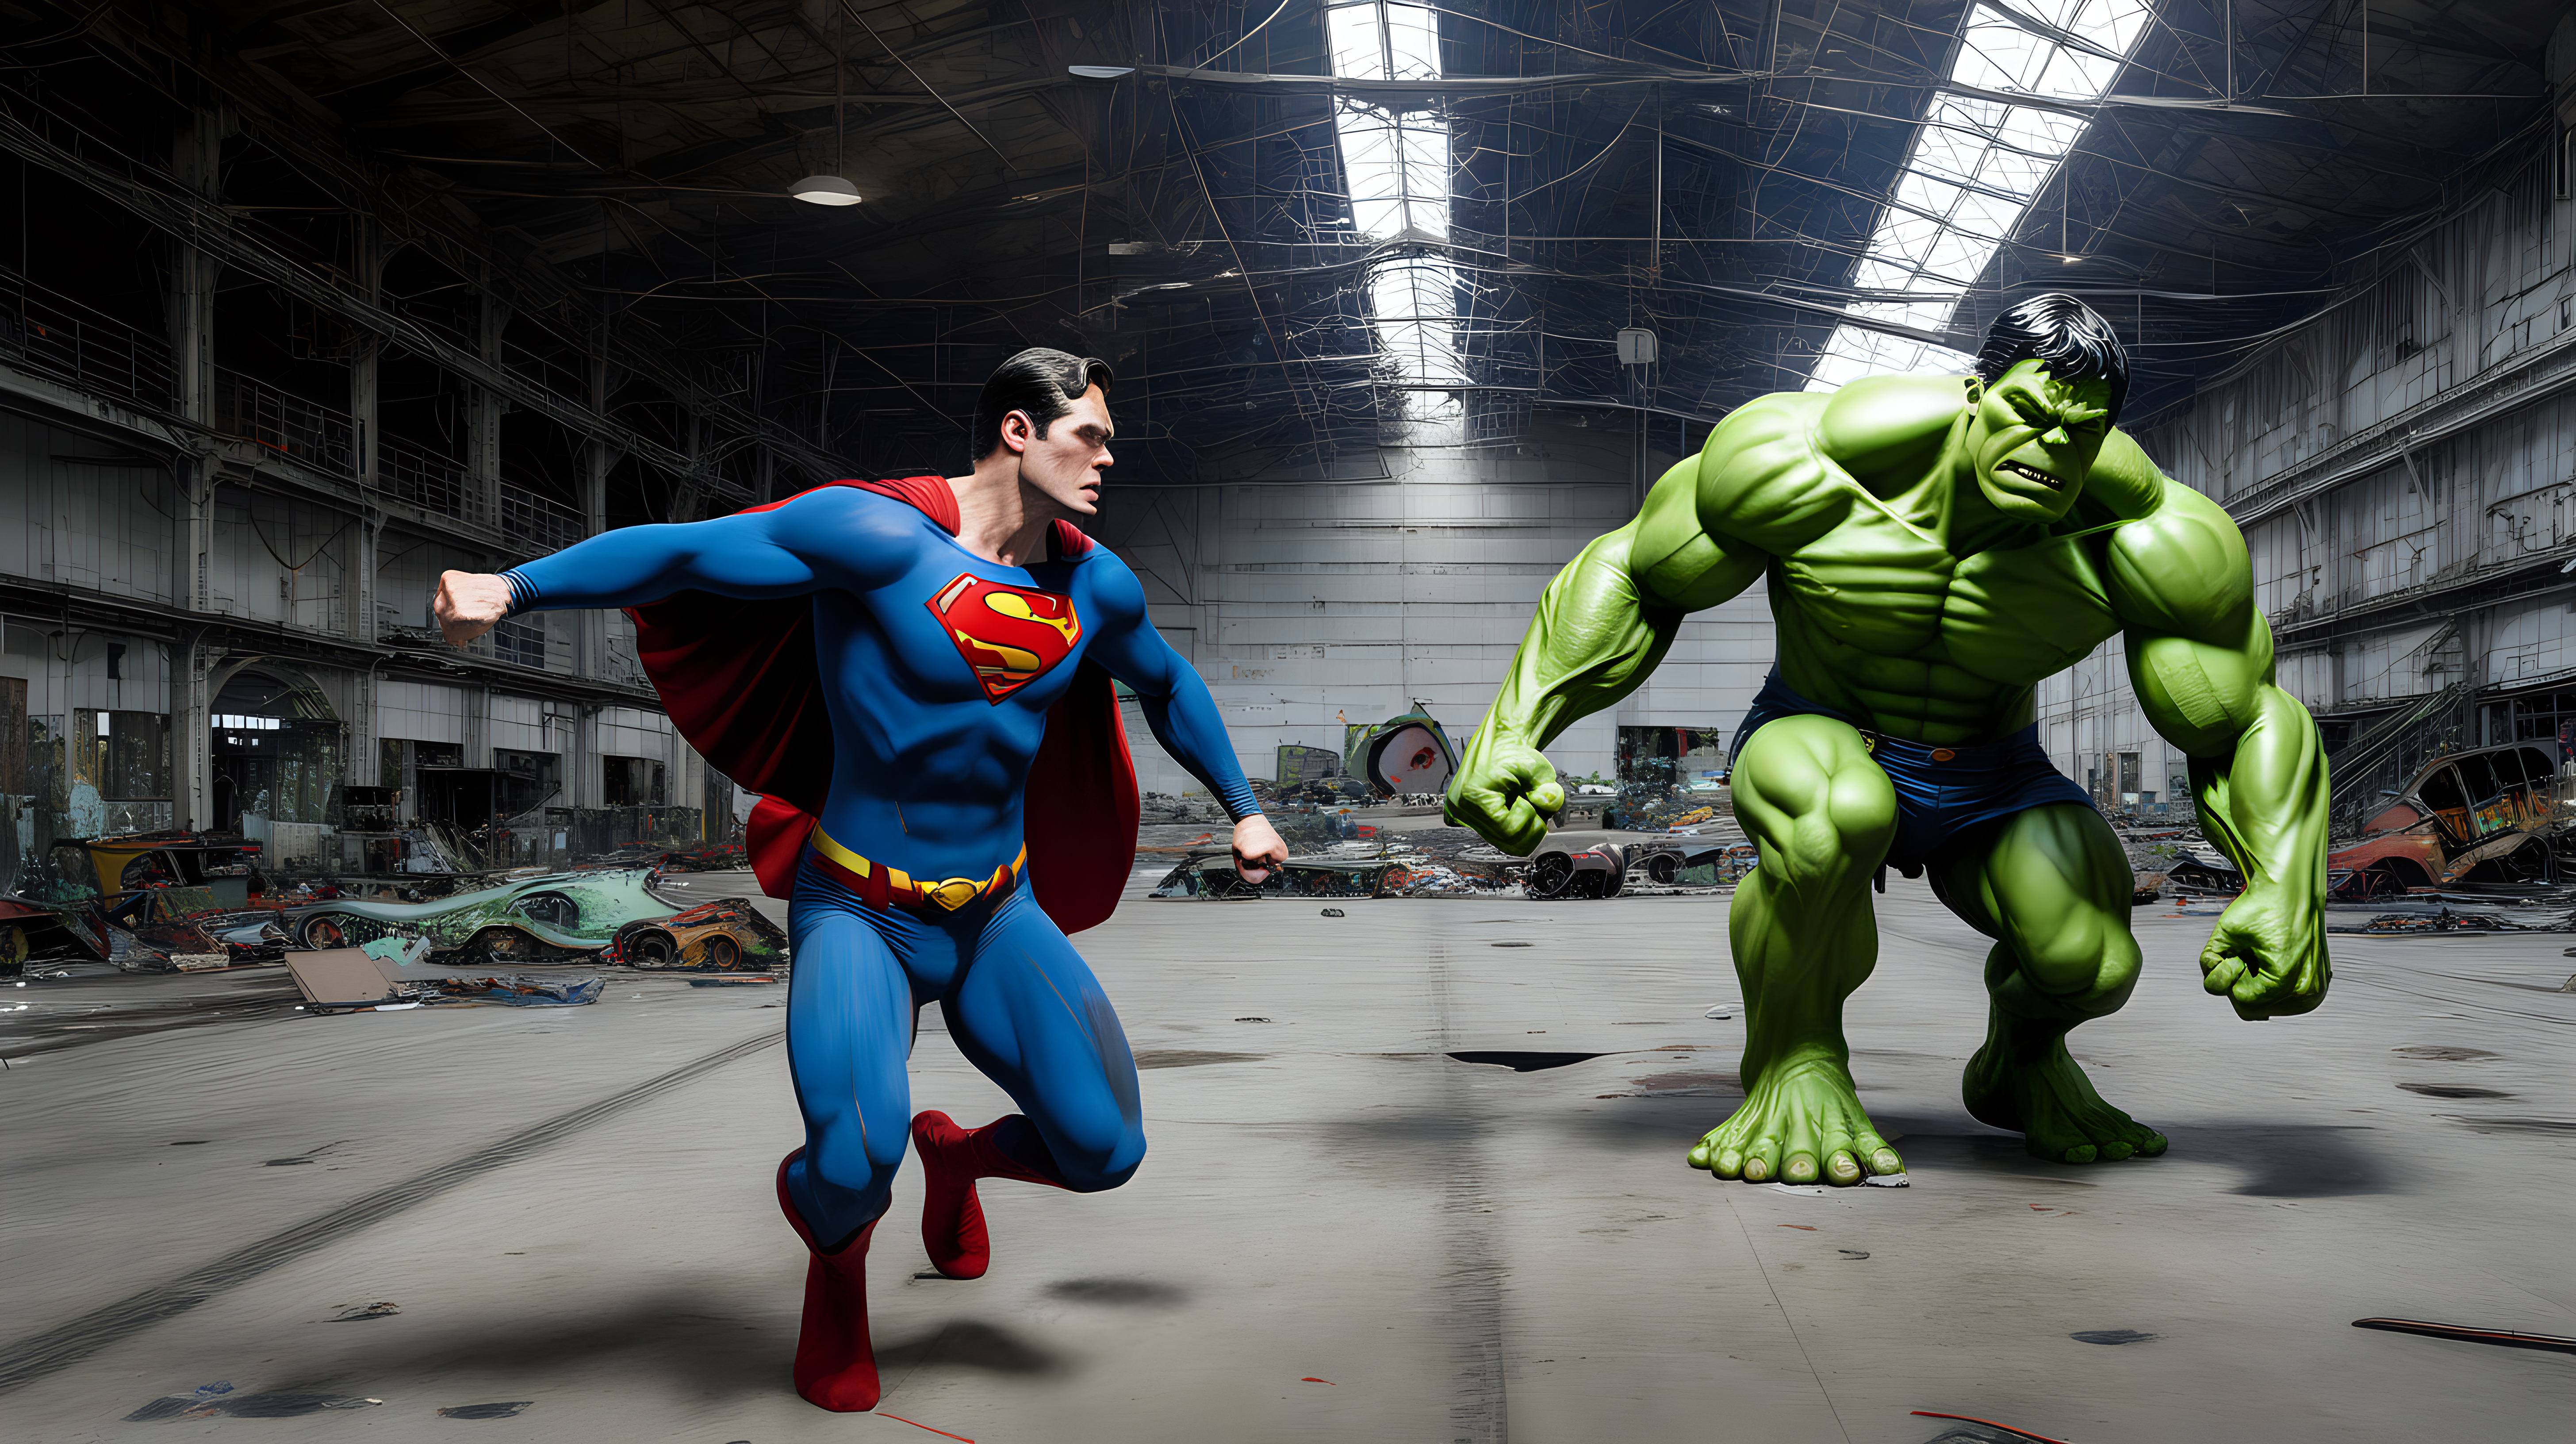 Superman fights the hulk in an abandon airplane factory